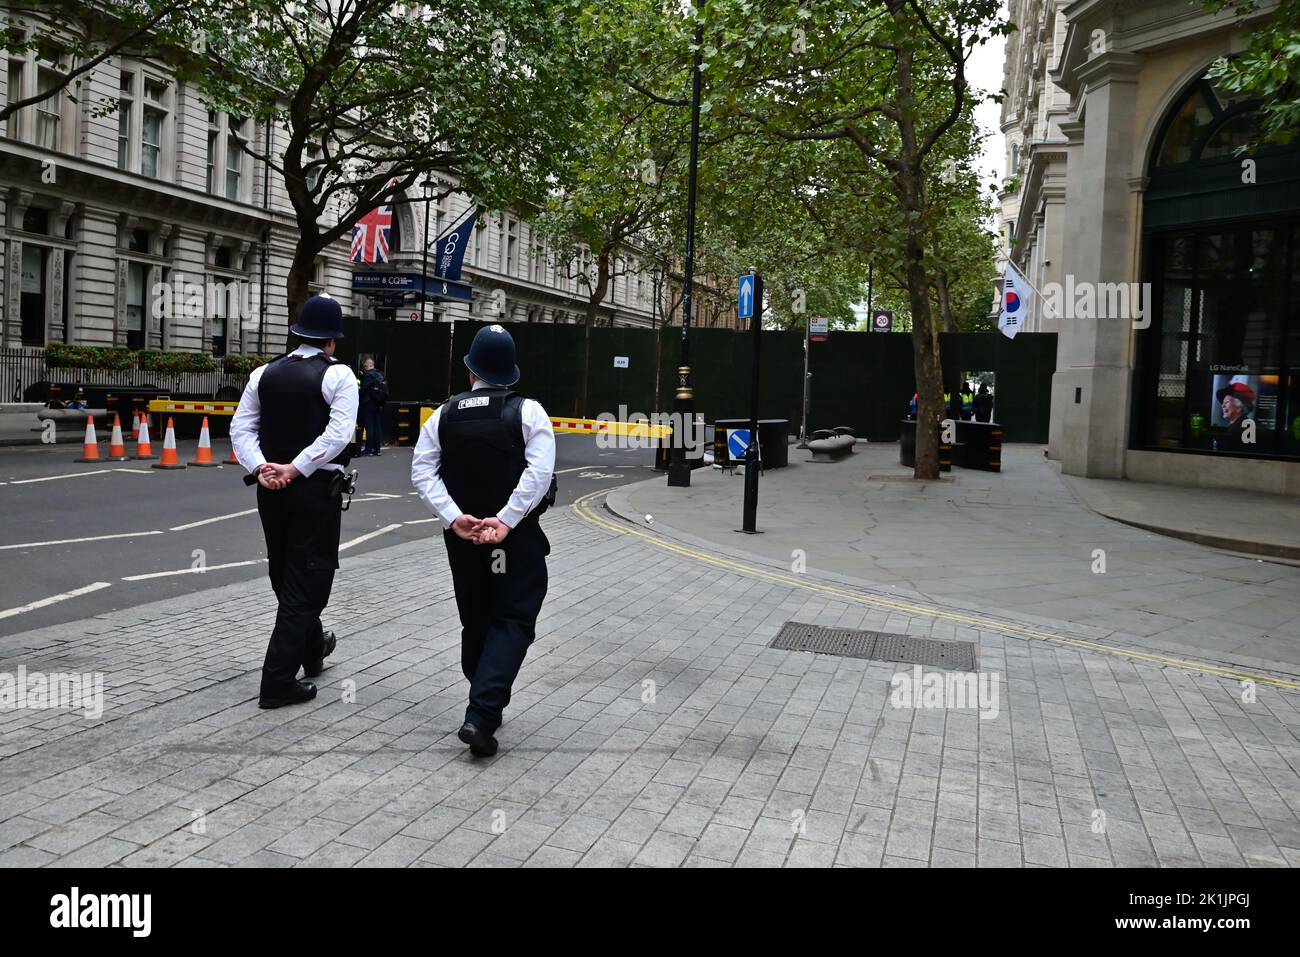 State funeral of Her Majesty Queen Elizabeth II, London, UK, Monday 19th September 2022. Police officers on the beat patrol the perimeter on Northumberland Avenue. Stock Photo